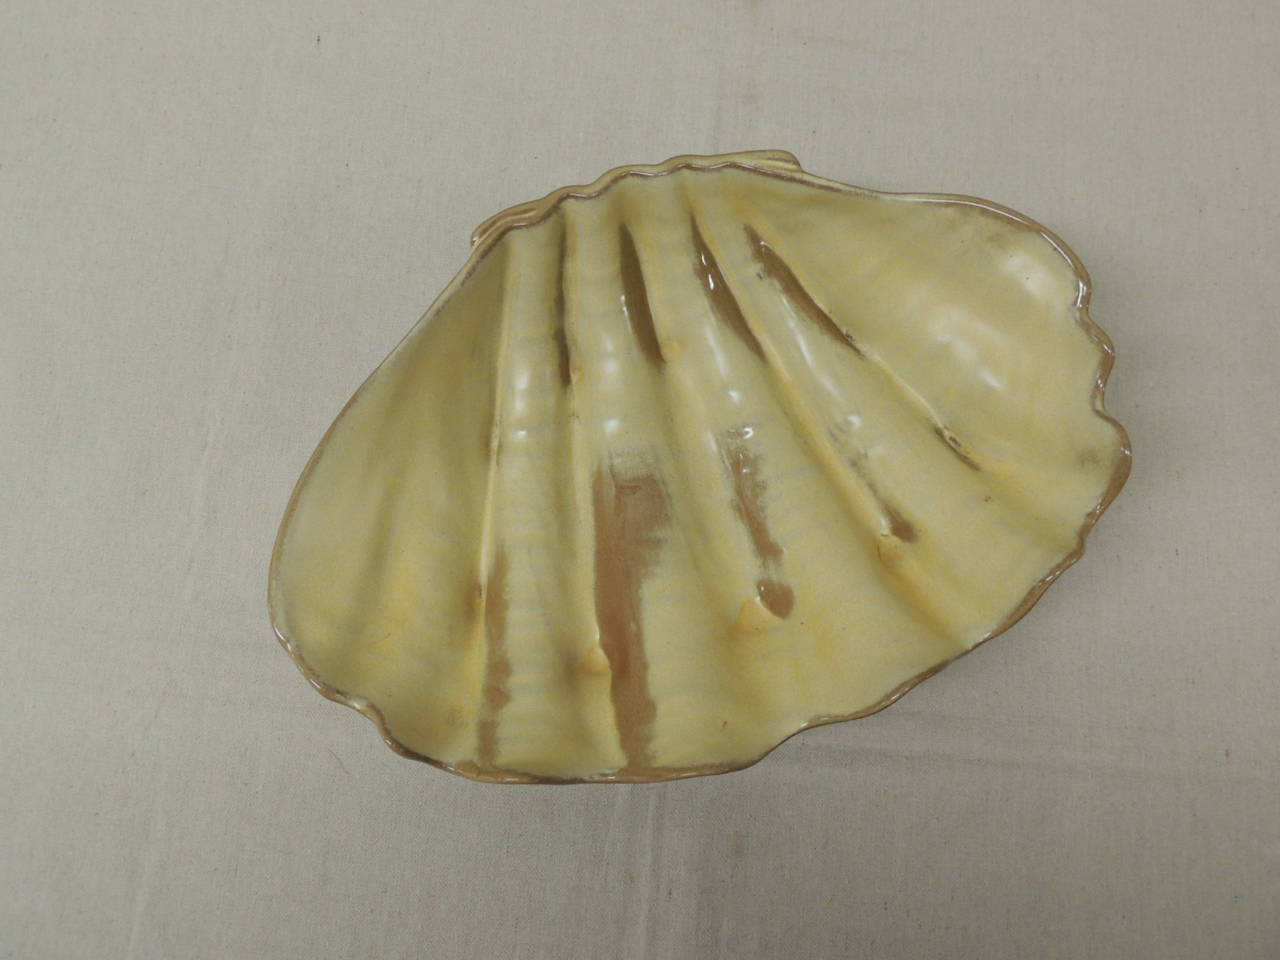 Antique Textiles Galleries:
Big ceramic clam shell from Francoma OH. Midcentury glazed pottery, great serving piece. Workshop hallmark stamped.